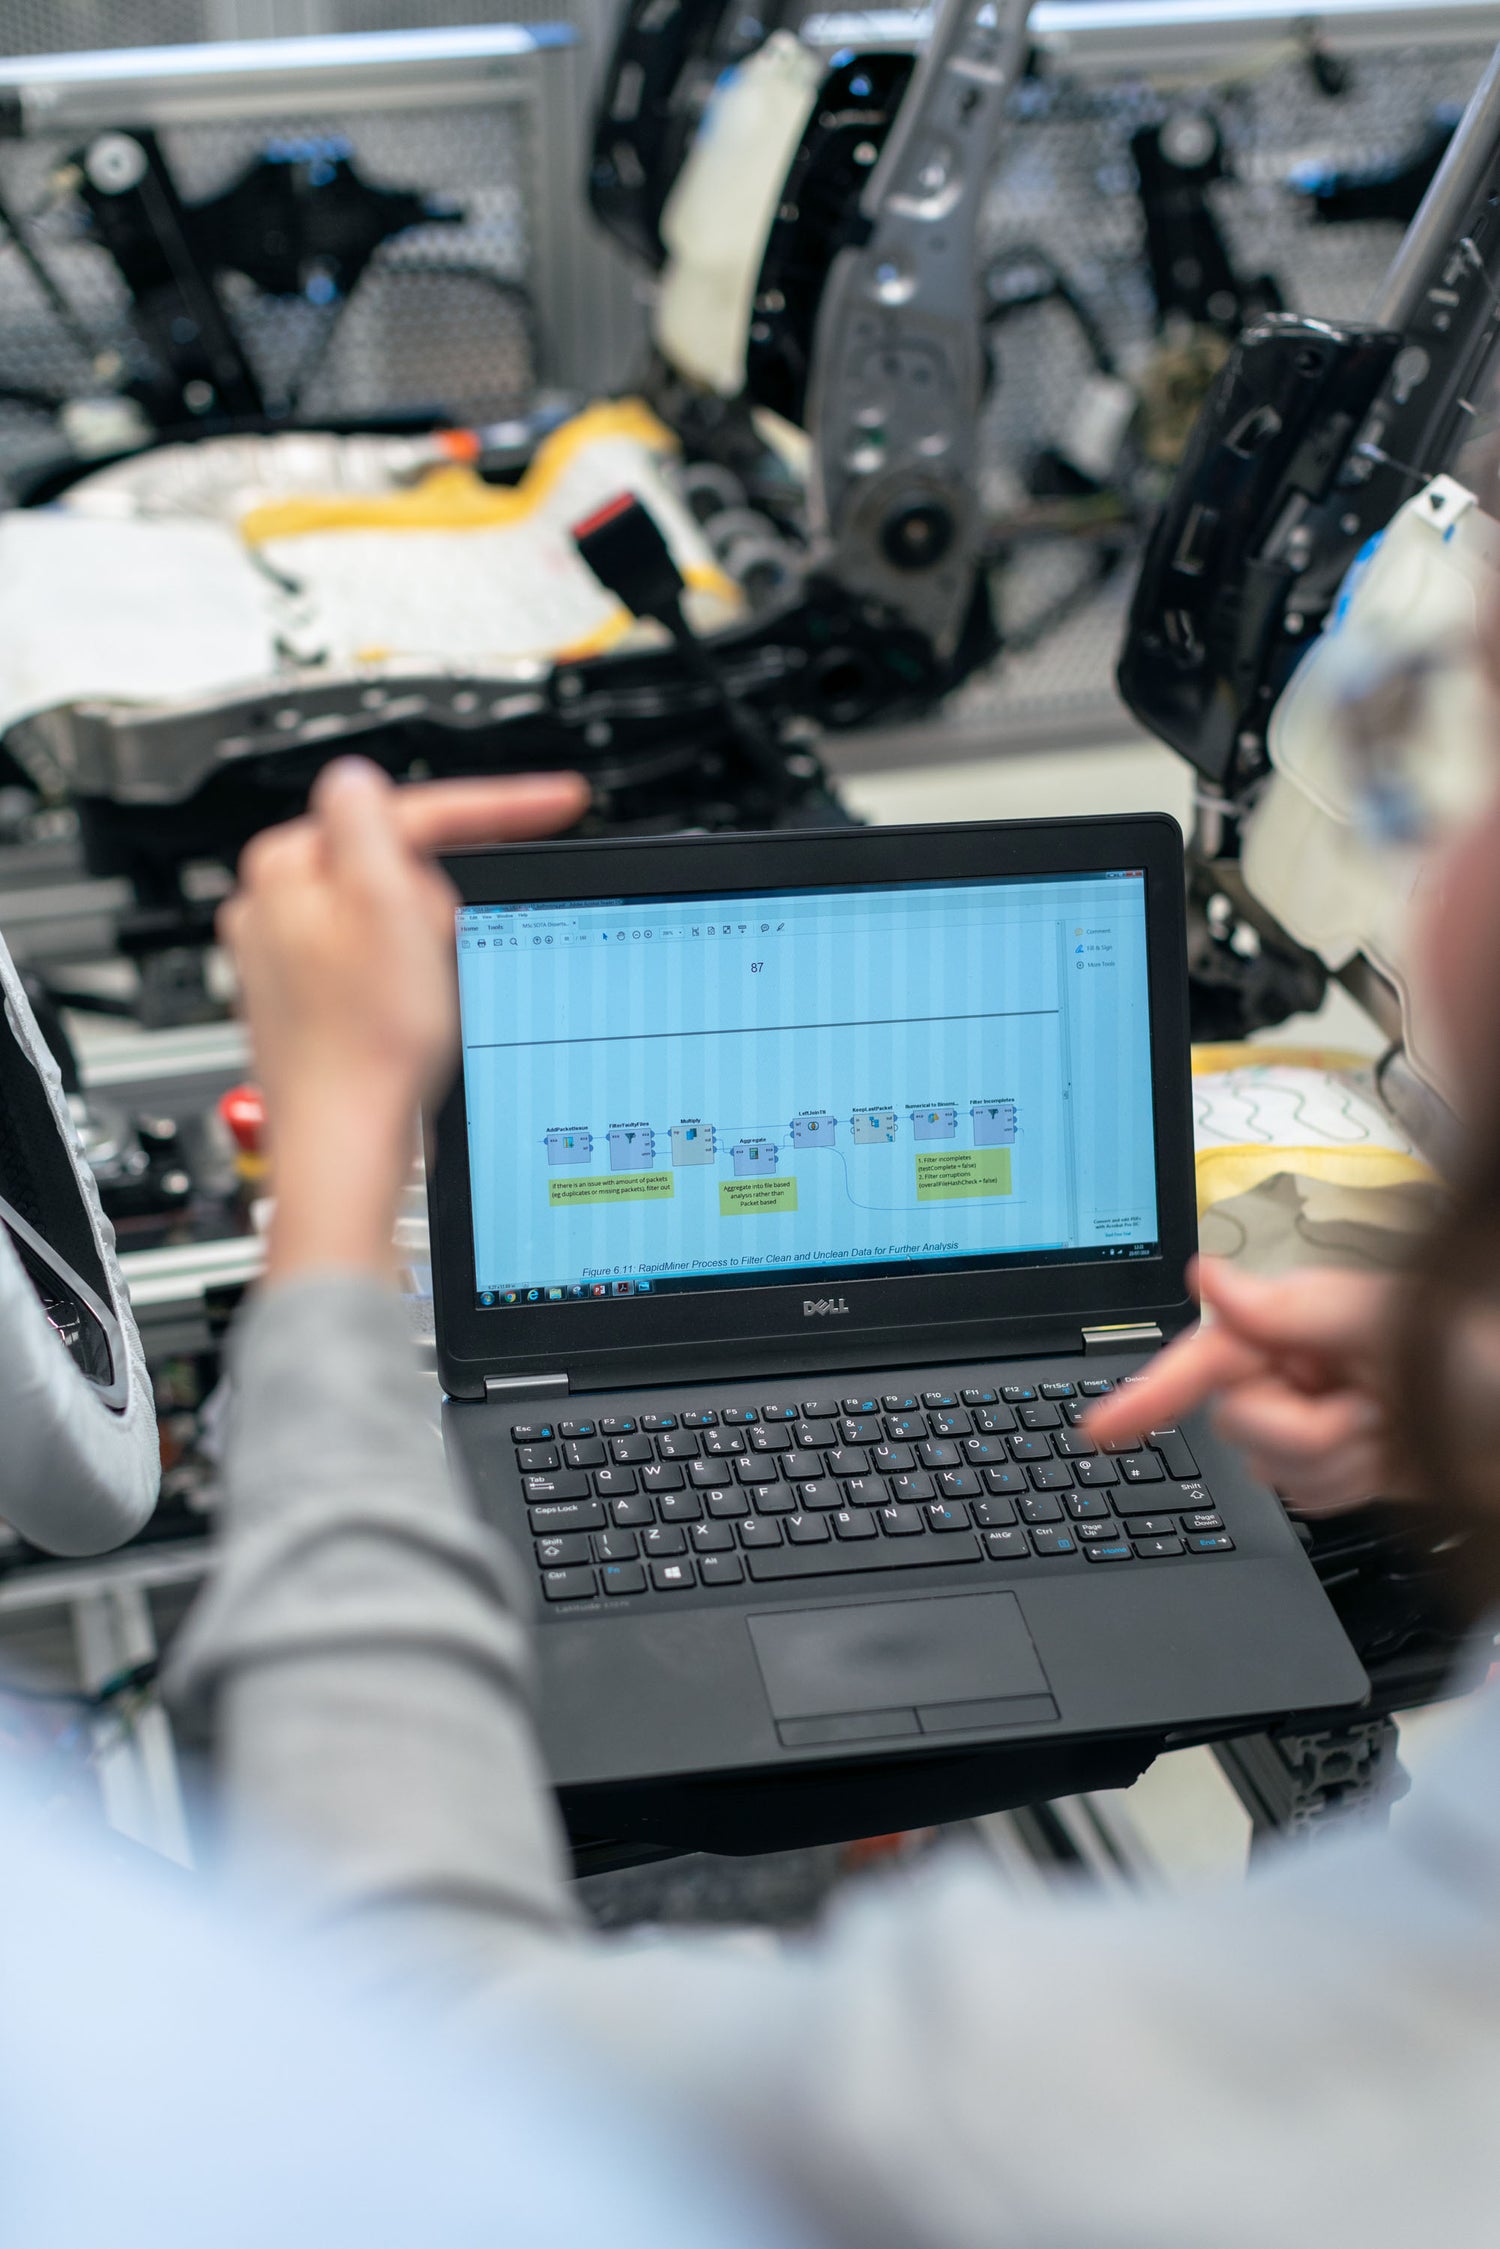 Over-the-shoulder view of an engineer working on a laptop with a vehicle assembly diagram on the screen, car parts and components visible in the background.